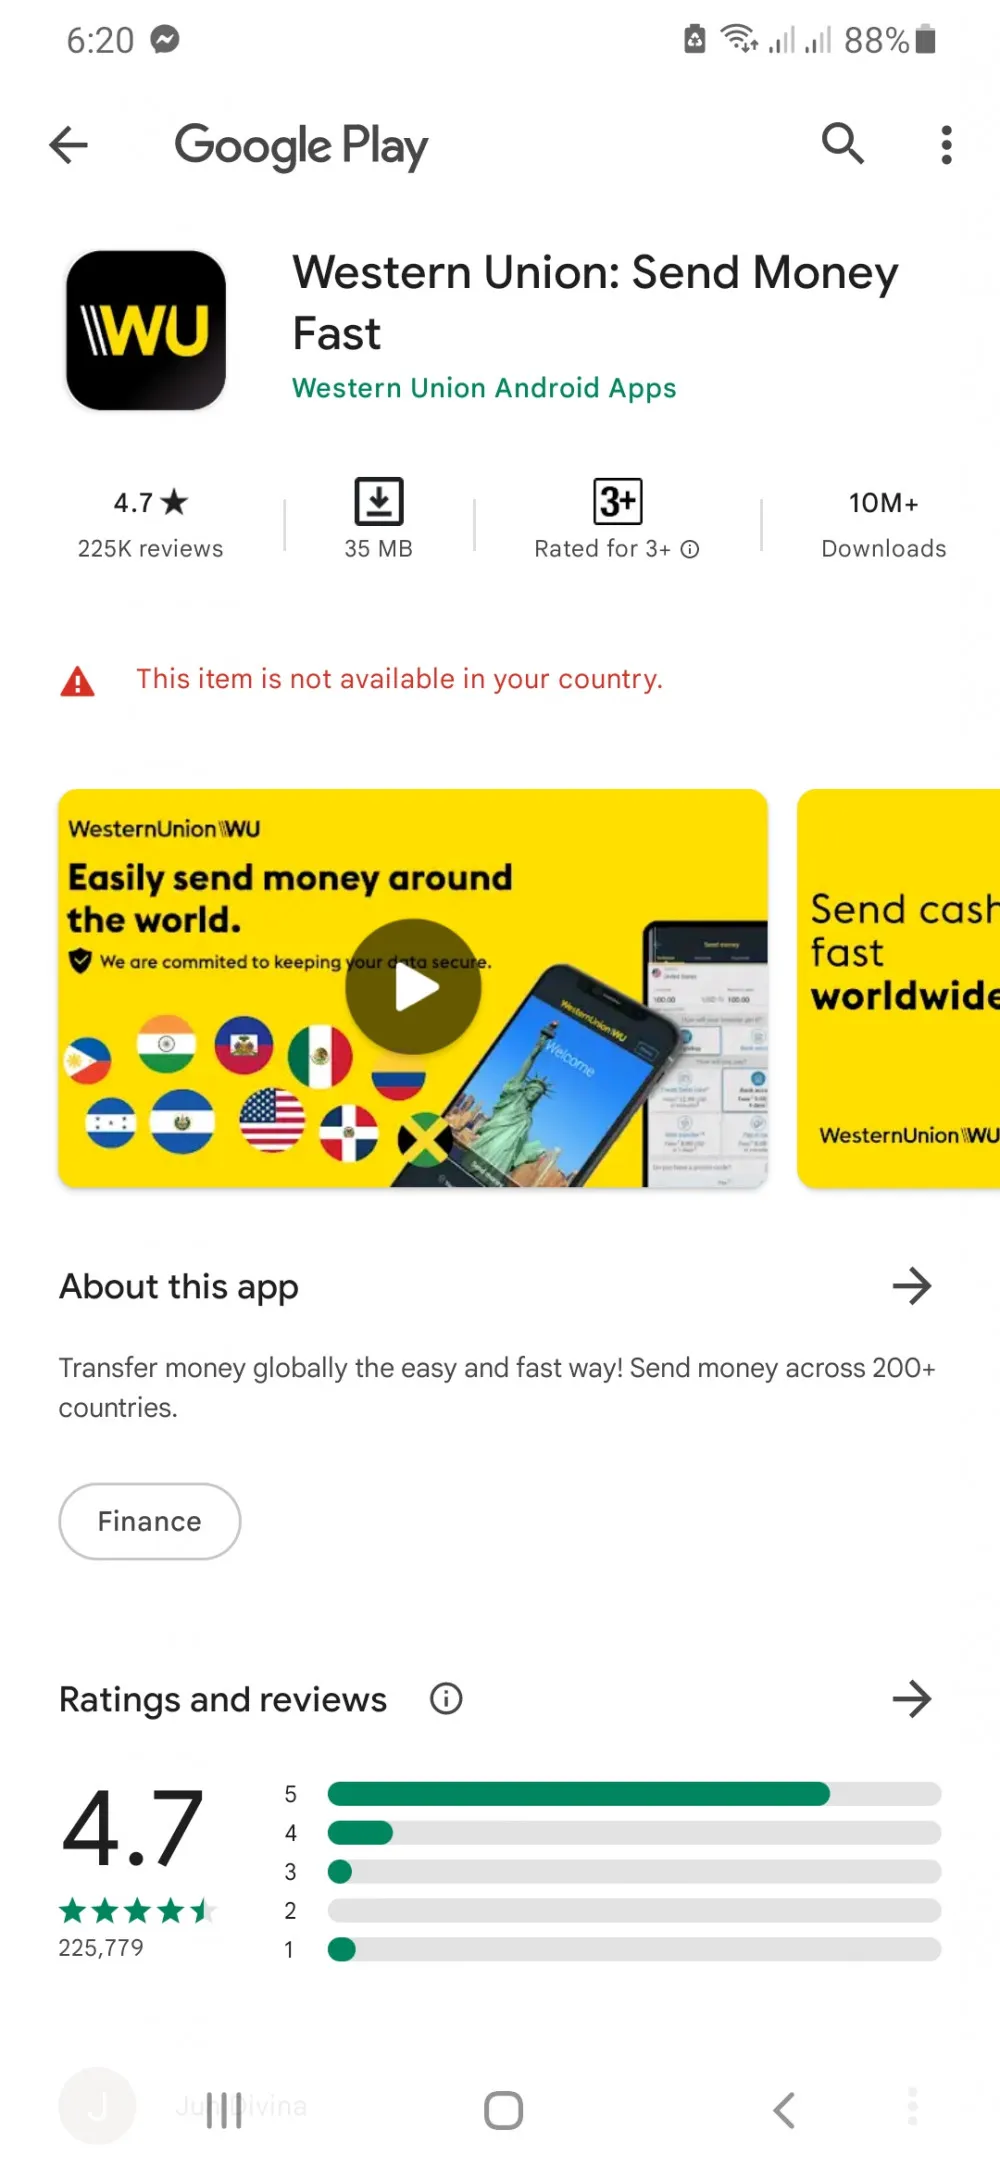 Western Union app not available in some countries